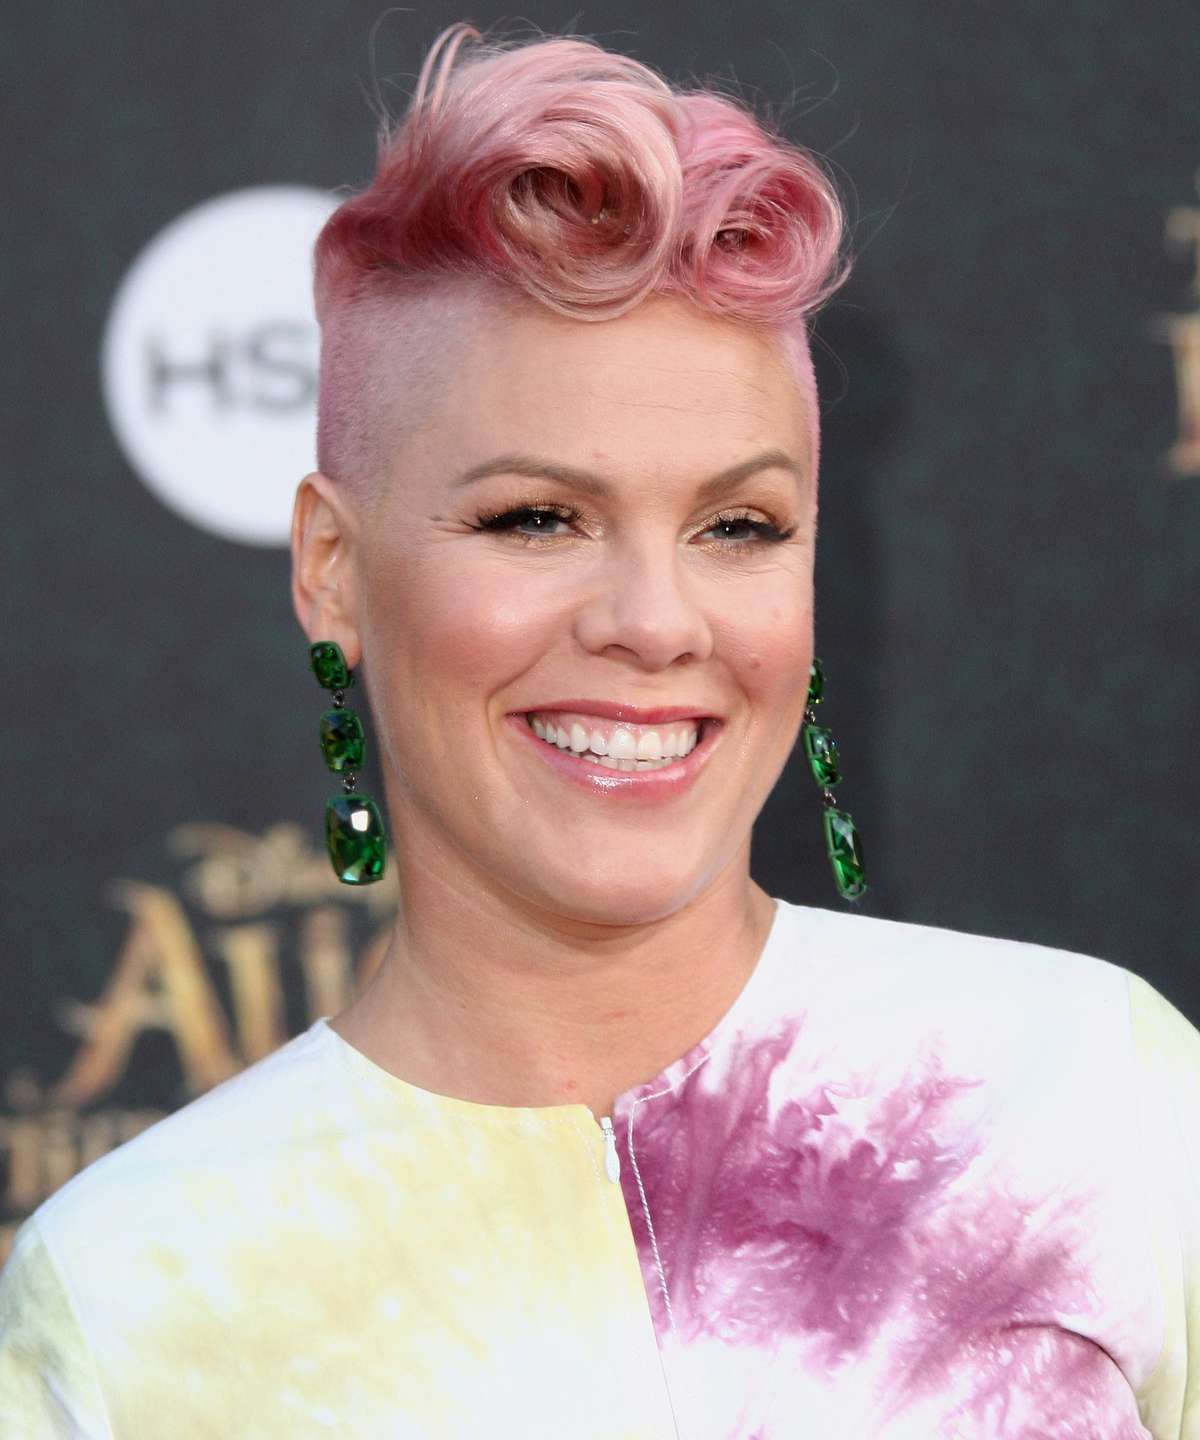 Recording artist Pink, aka Alecia Moore attends the premiere of Disney's 'Alice Through The Looking Glass' at the El Capitan Theatre on May 23, 2016 in Hollywood, California.